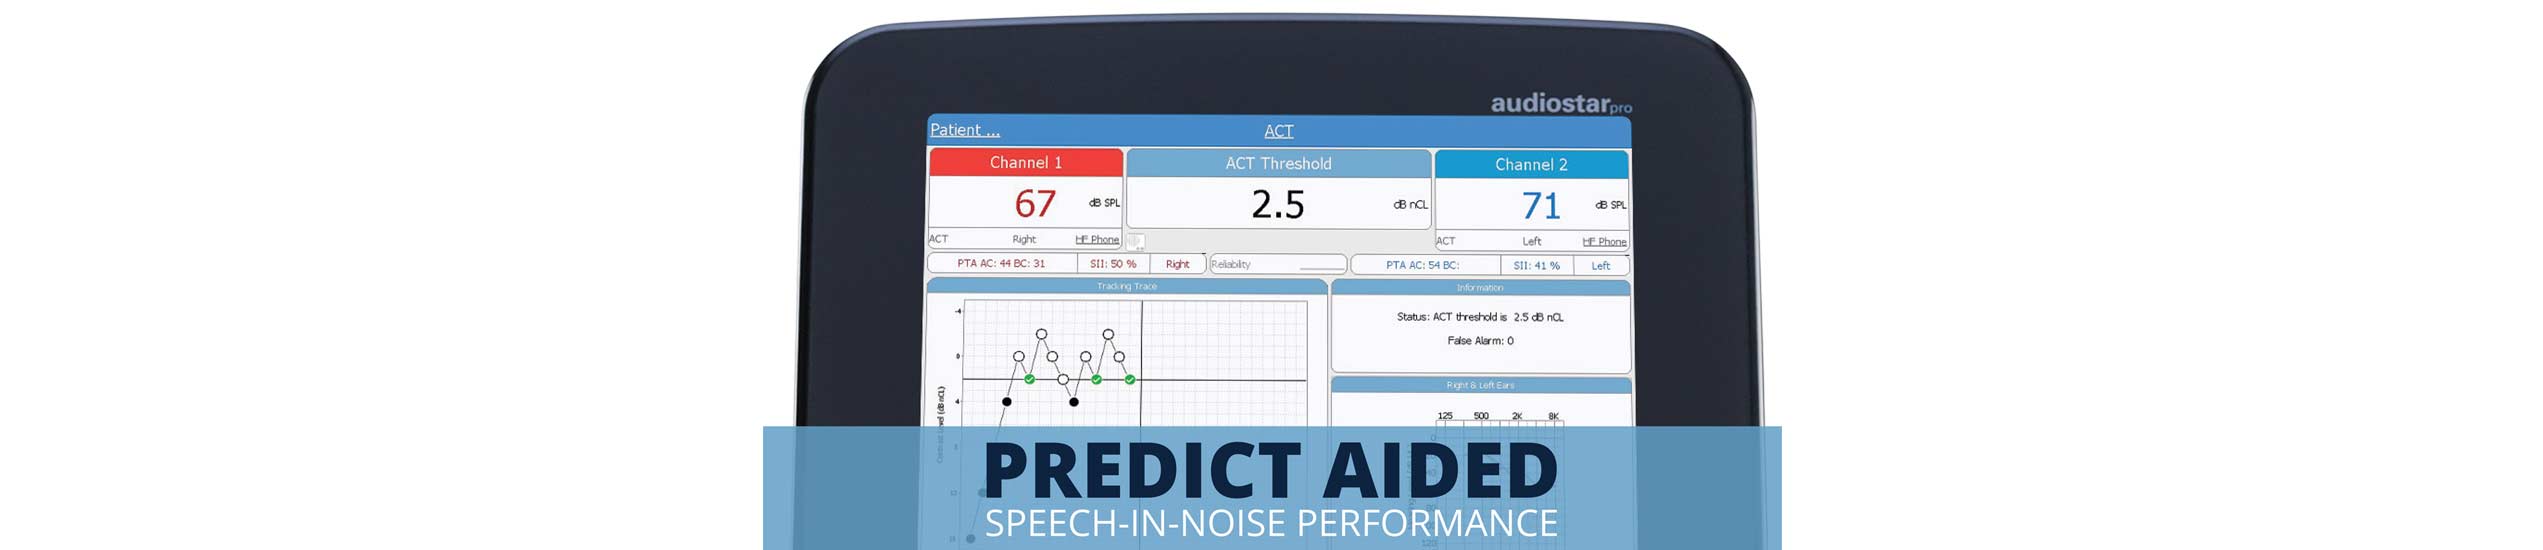 Audiostar Pro displaying the ACT test